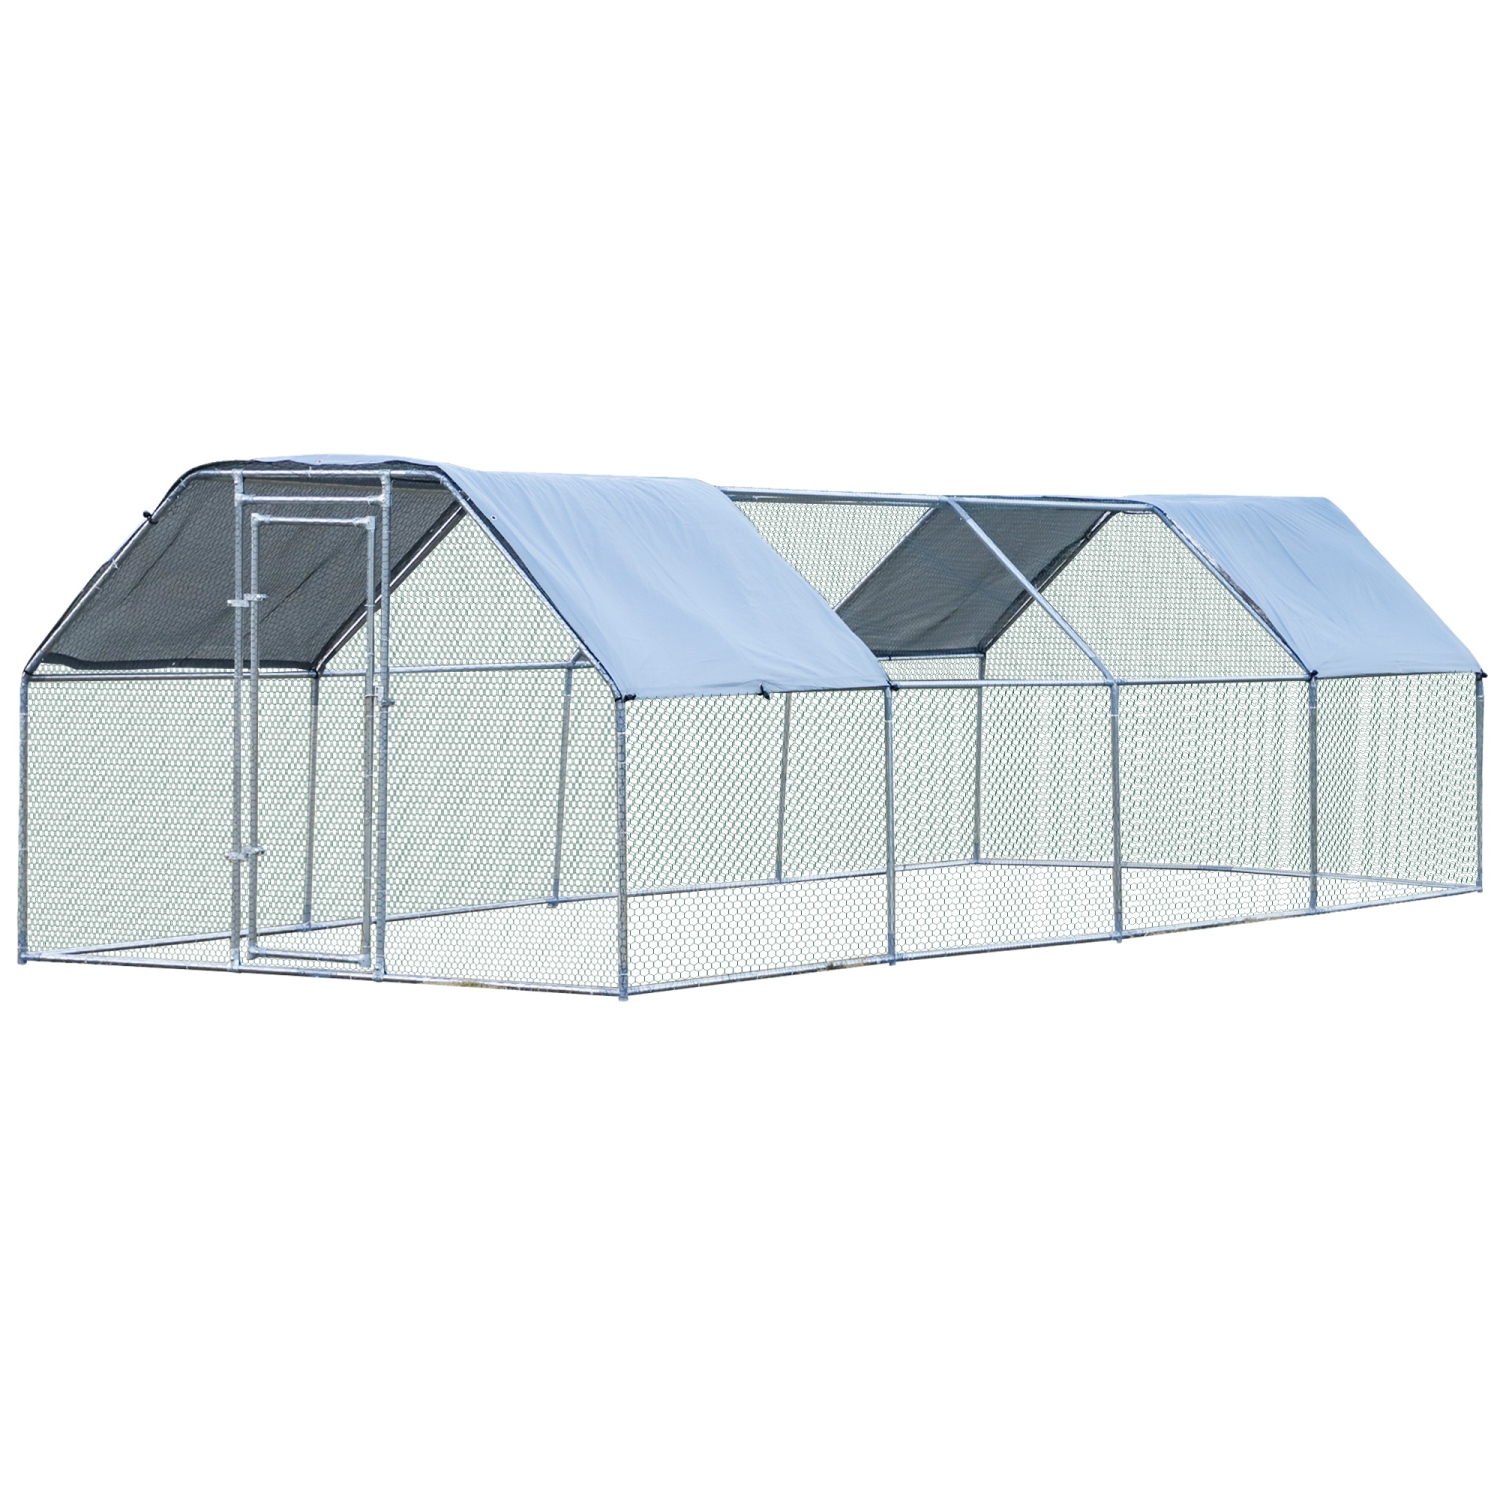 PawHut 9.2' x 24.9' Metal Chicken Coop, Galvanized Walk-in Hen House, Poultry Cage Outdoor Backyard with Waterproof UV-Protection Cover for Rabbits, Ducks